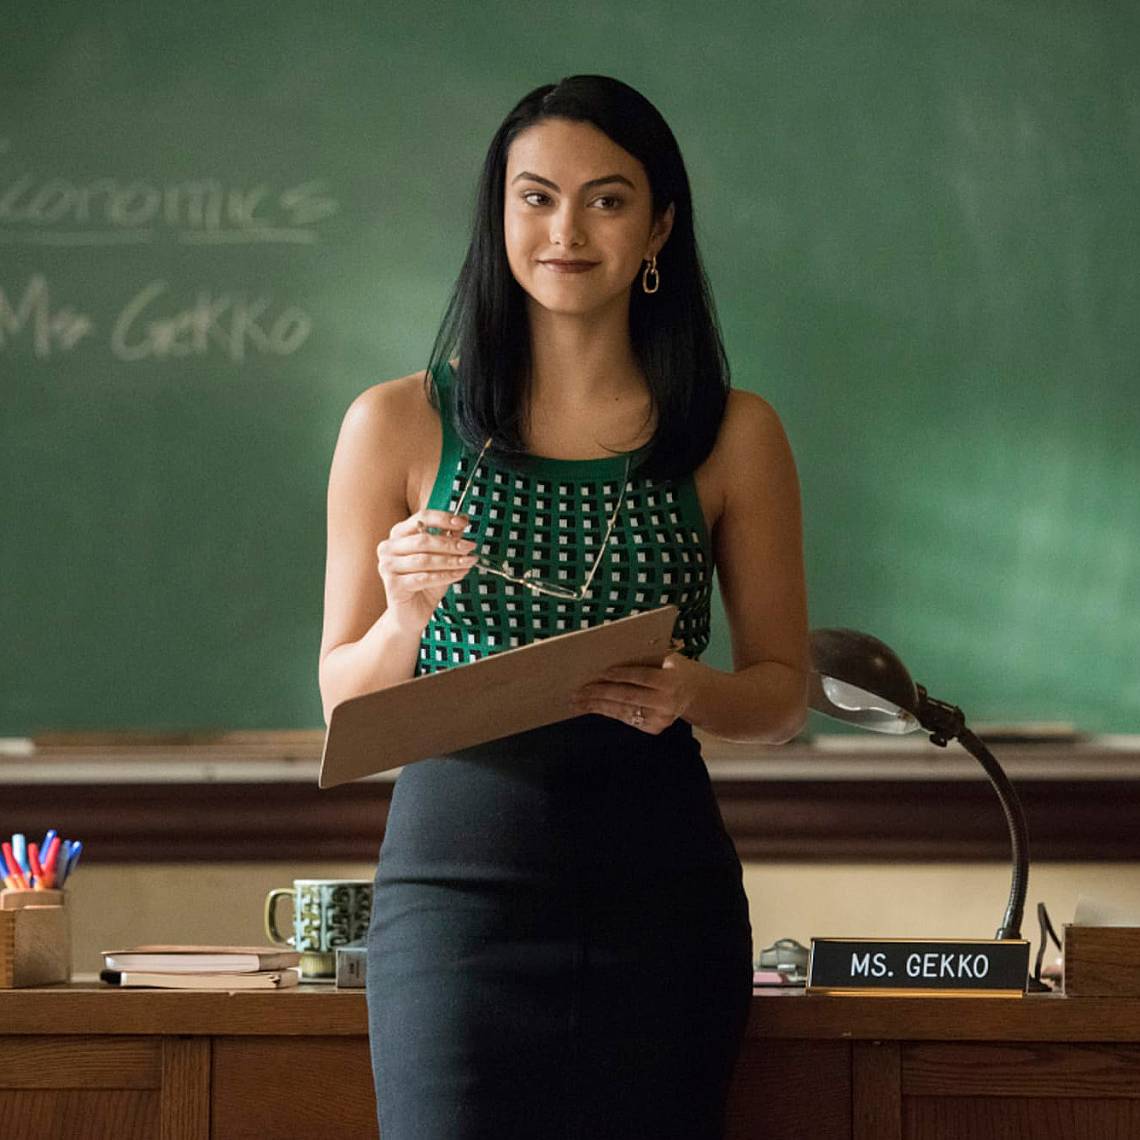 Camila Mendes as Veronica Lodge in Riverdale